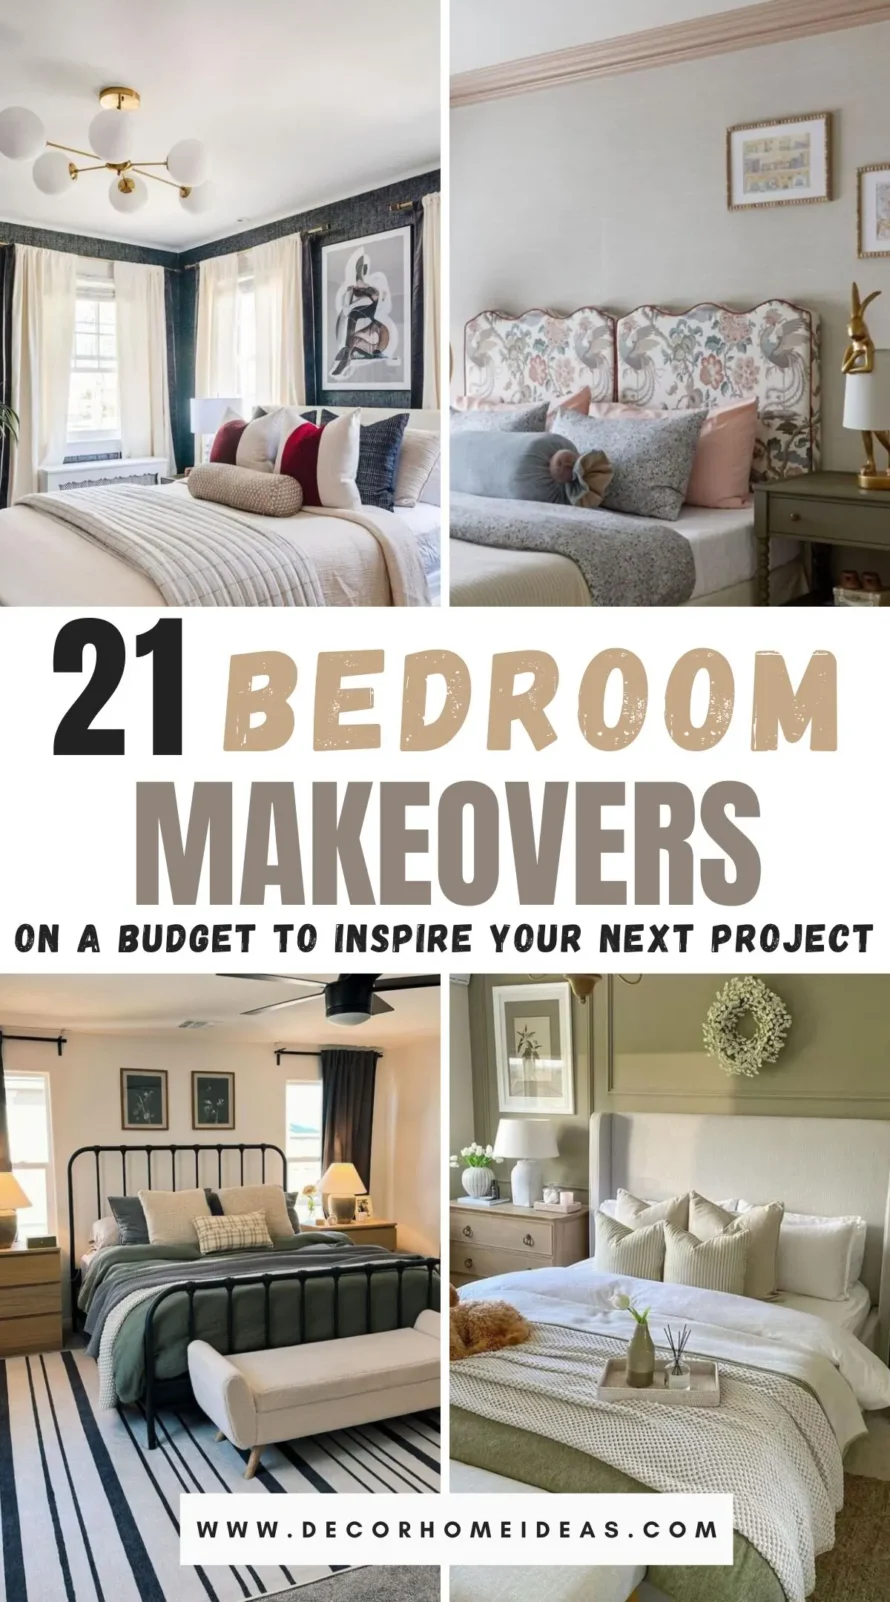 Looking to refresh your bedroom without overspending? Discover 21 budget-friendly revamps that will transform your space into a cozy, stylish retreat. From clever DIY projects to smart décor hacks, these ideas promise a stunning makeover without breaking the bank. Dive in and get inspired!